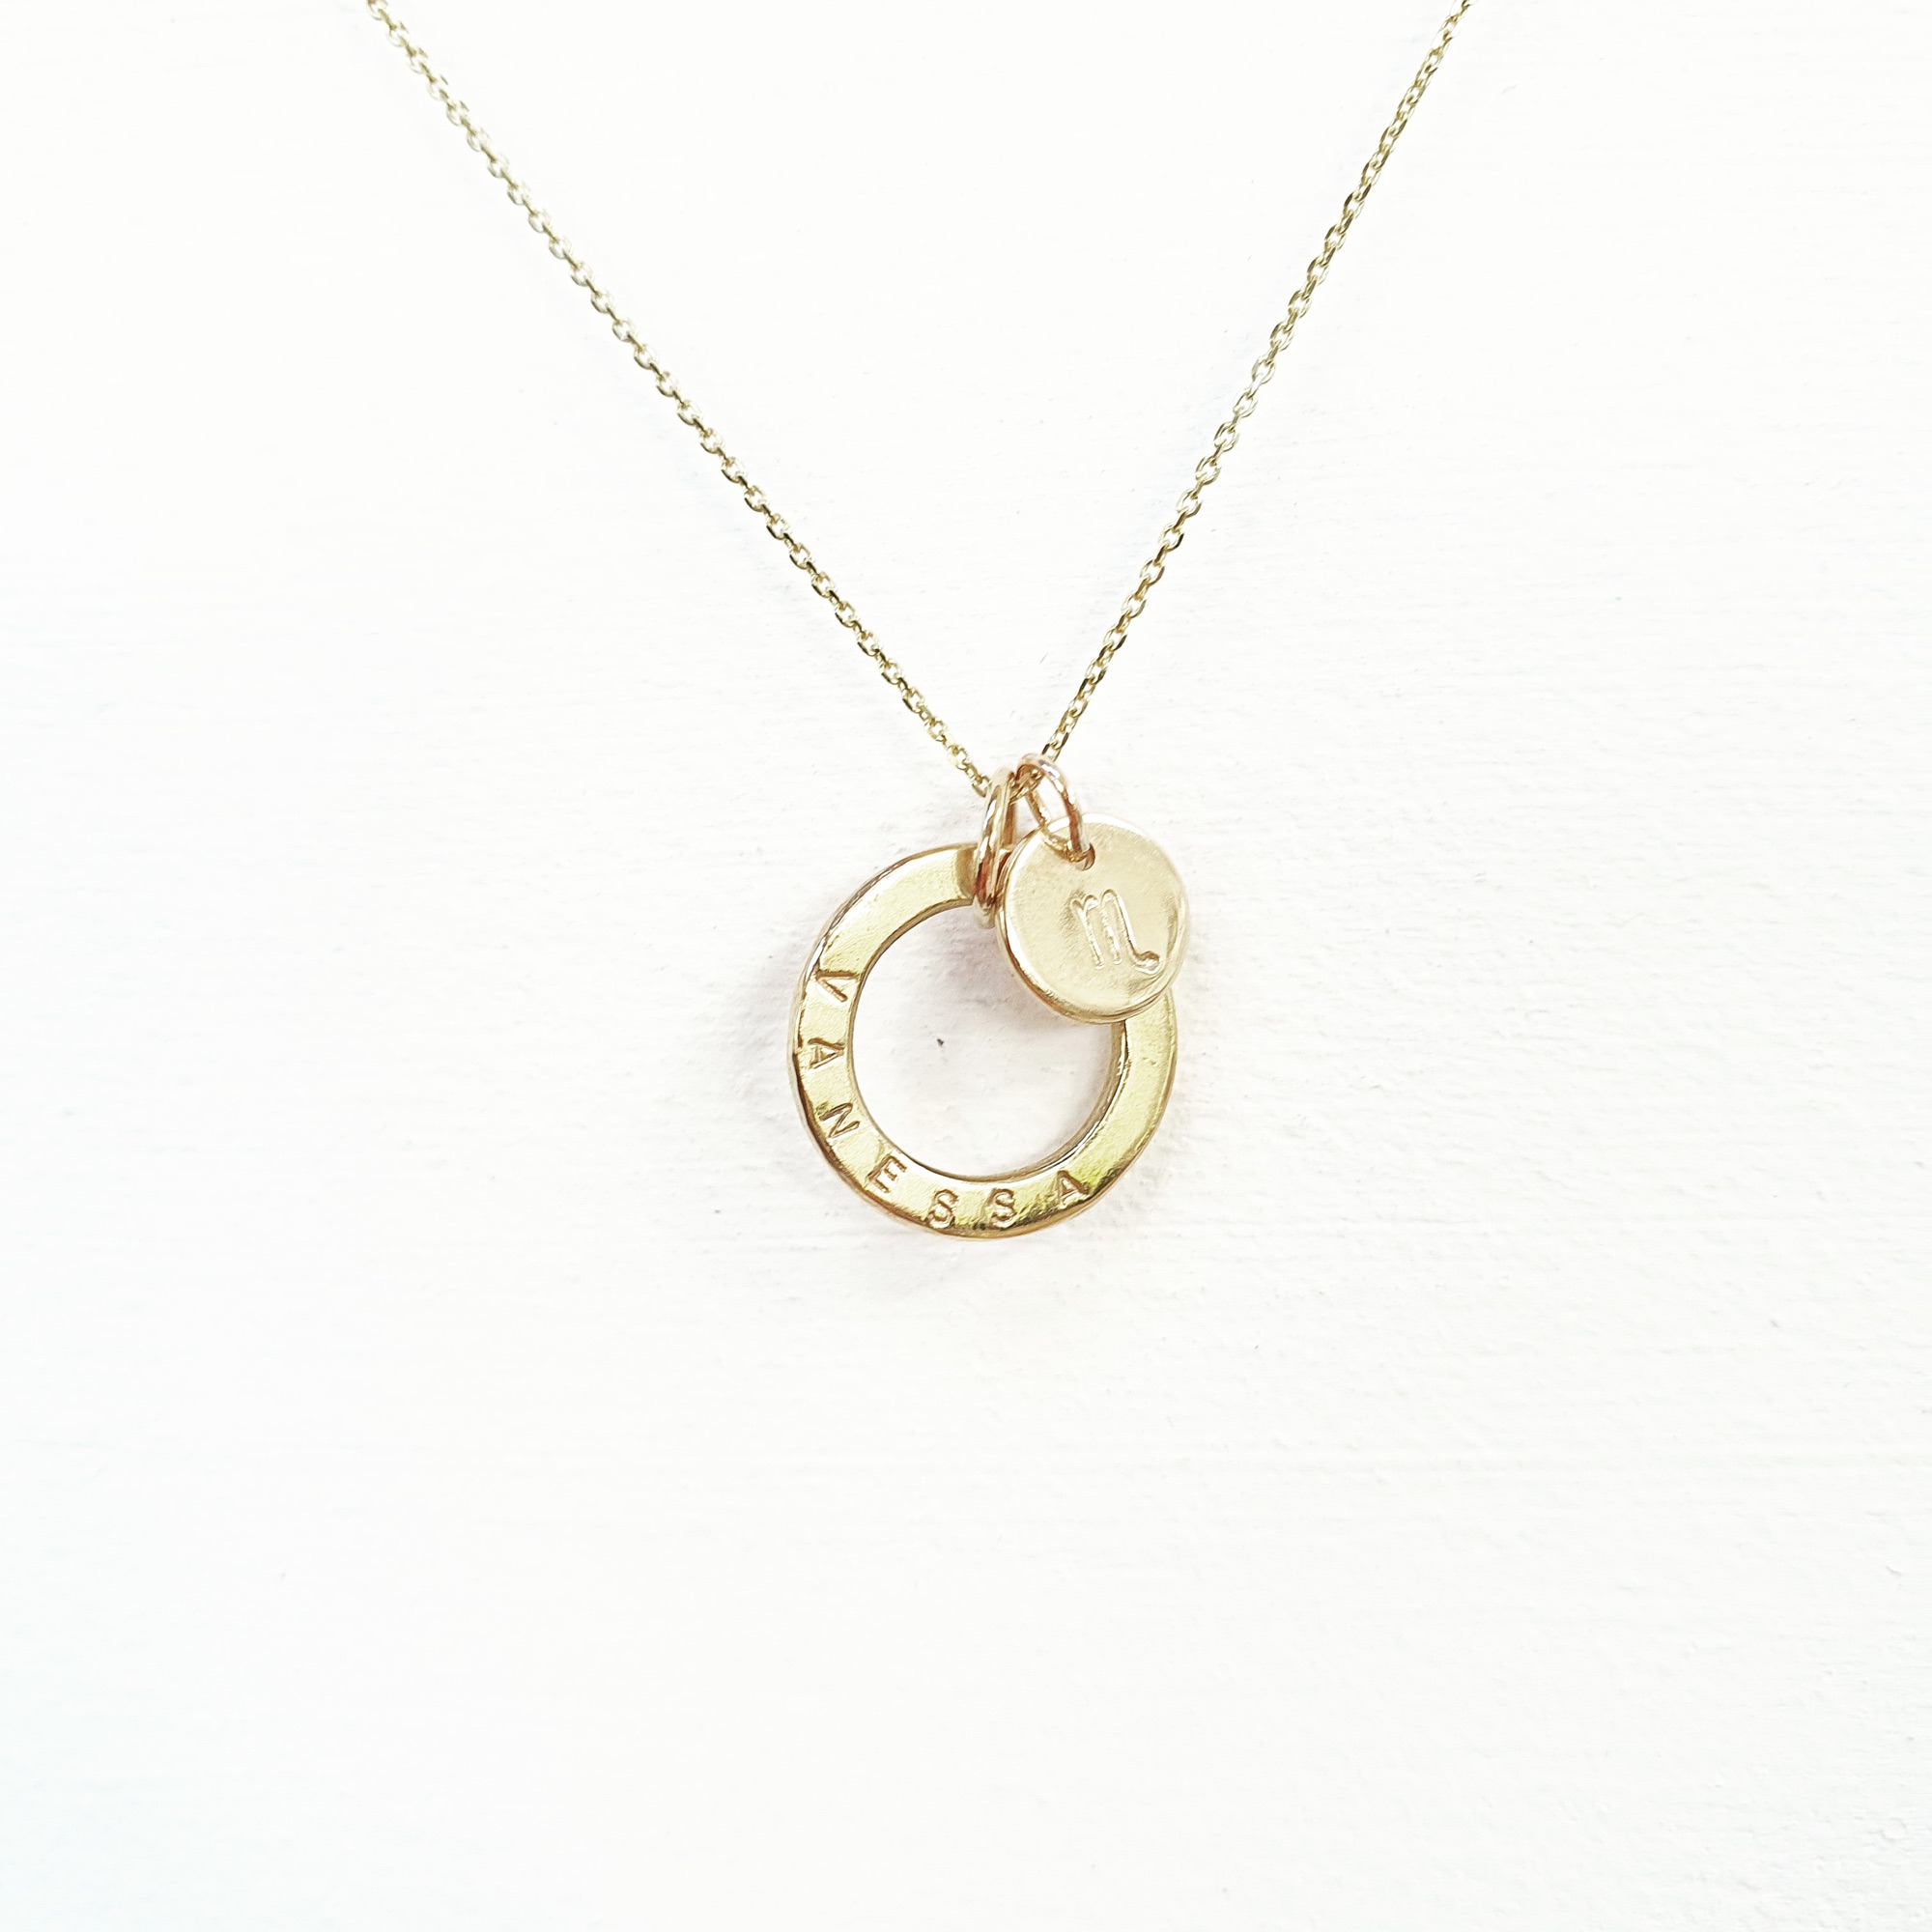 gold circle necklace